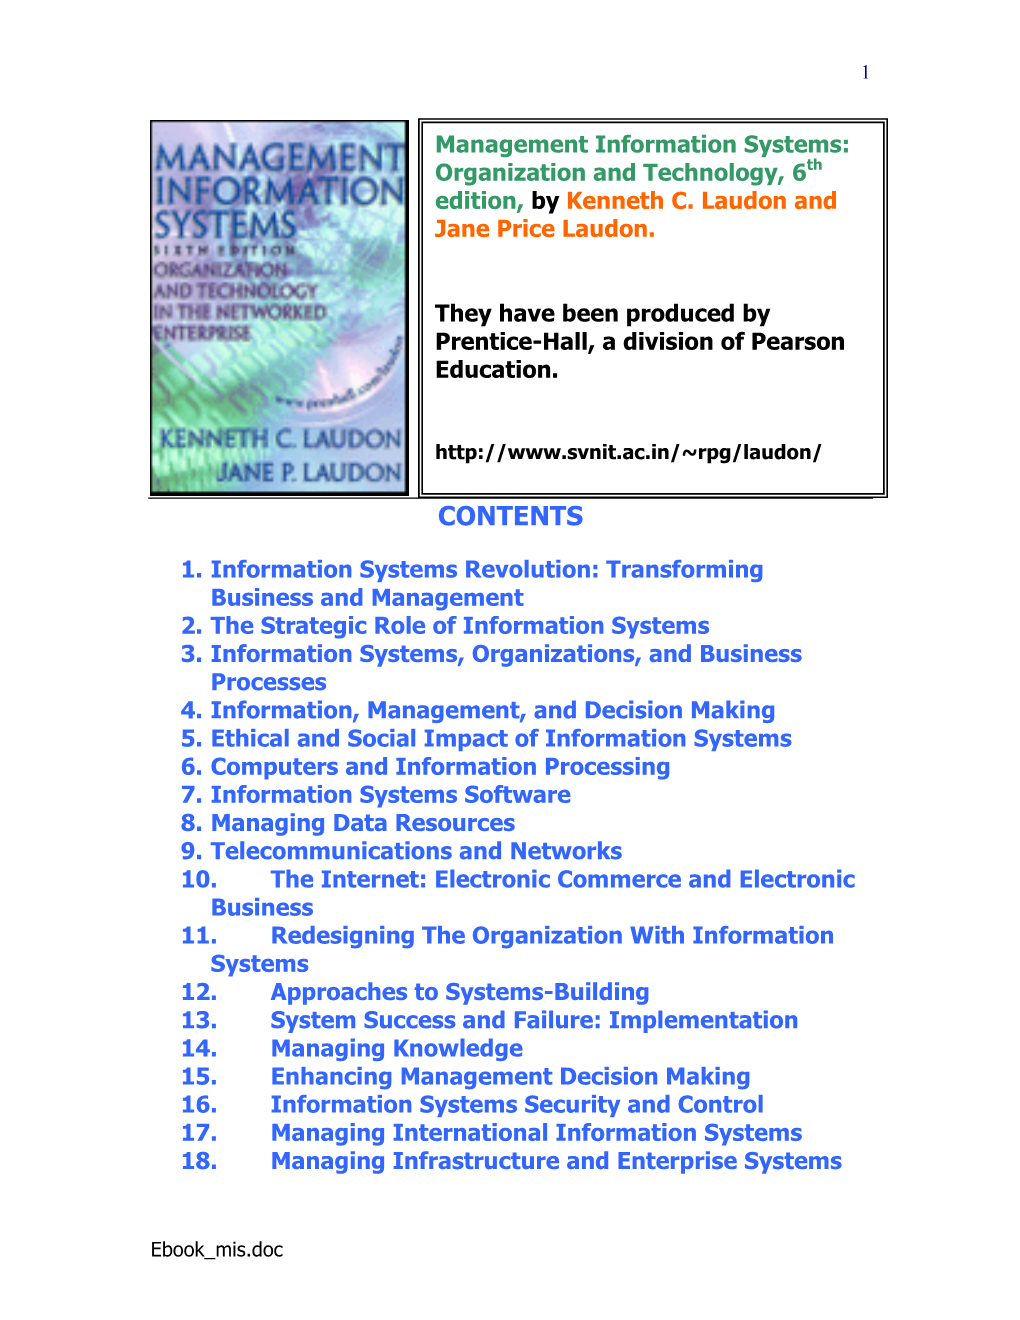 Topic 2 Management Information Systems